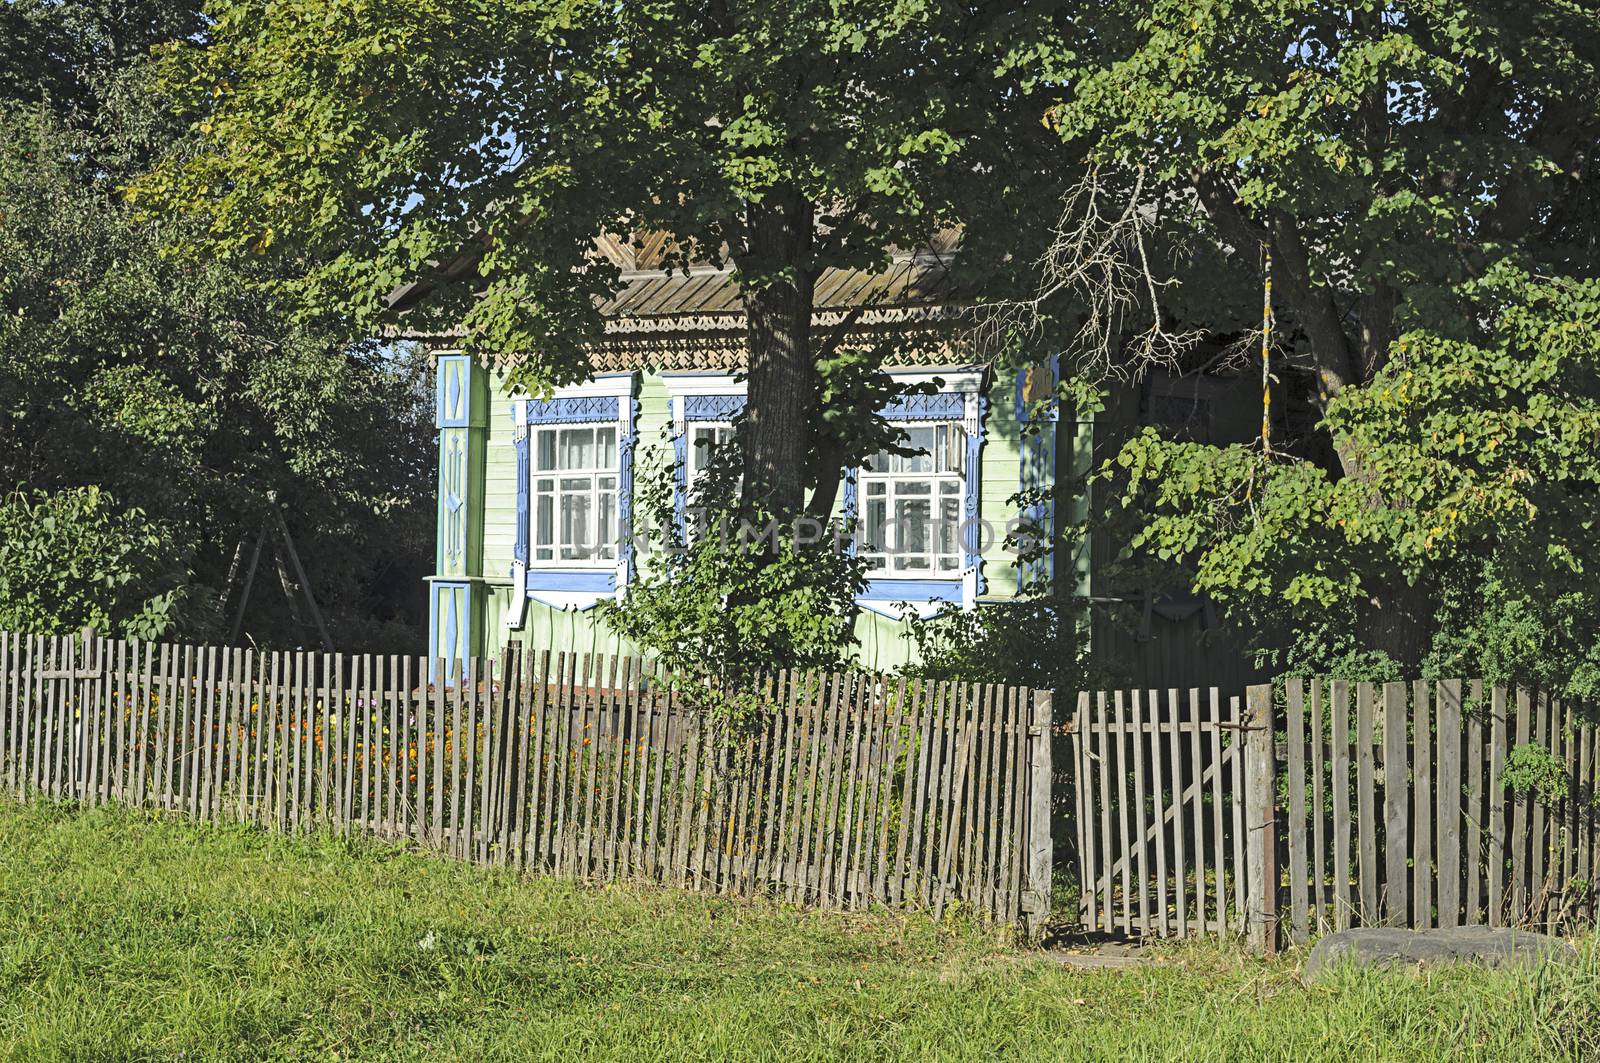 Small village house in shade of trees behind the old wooden fence